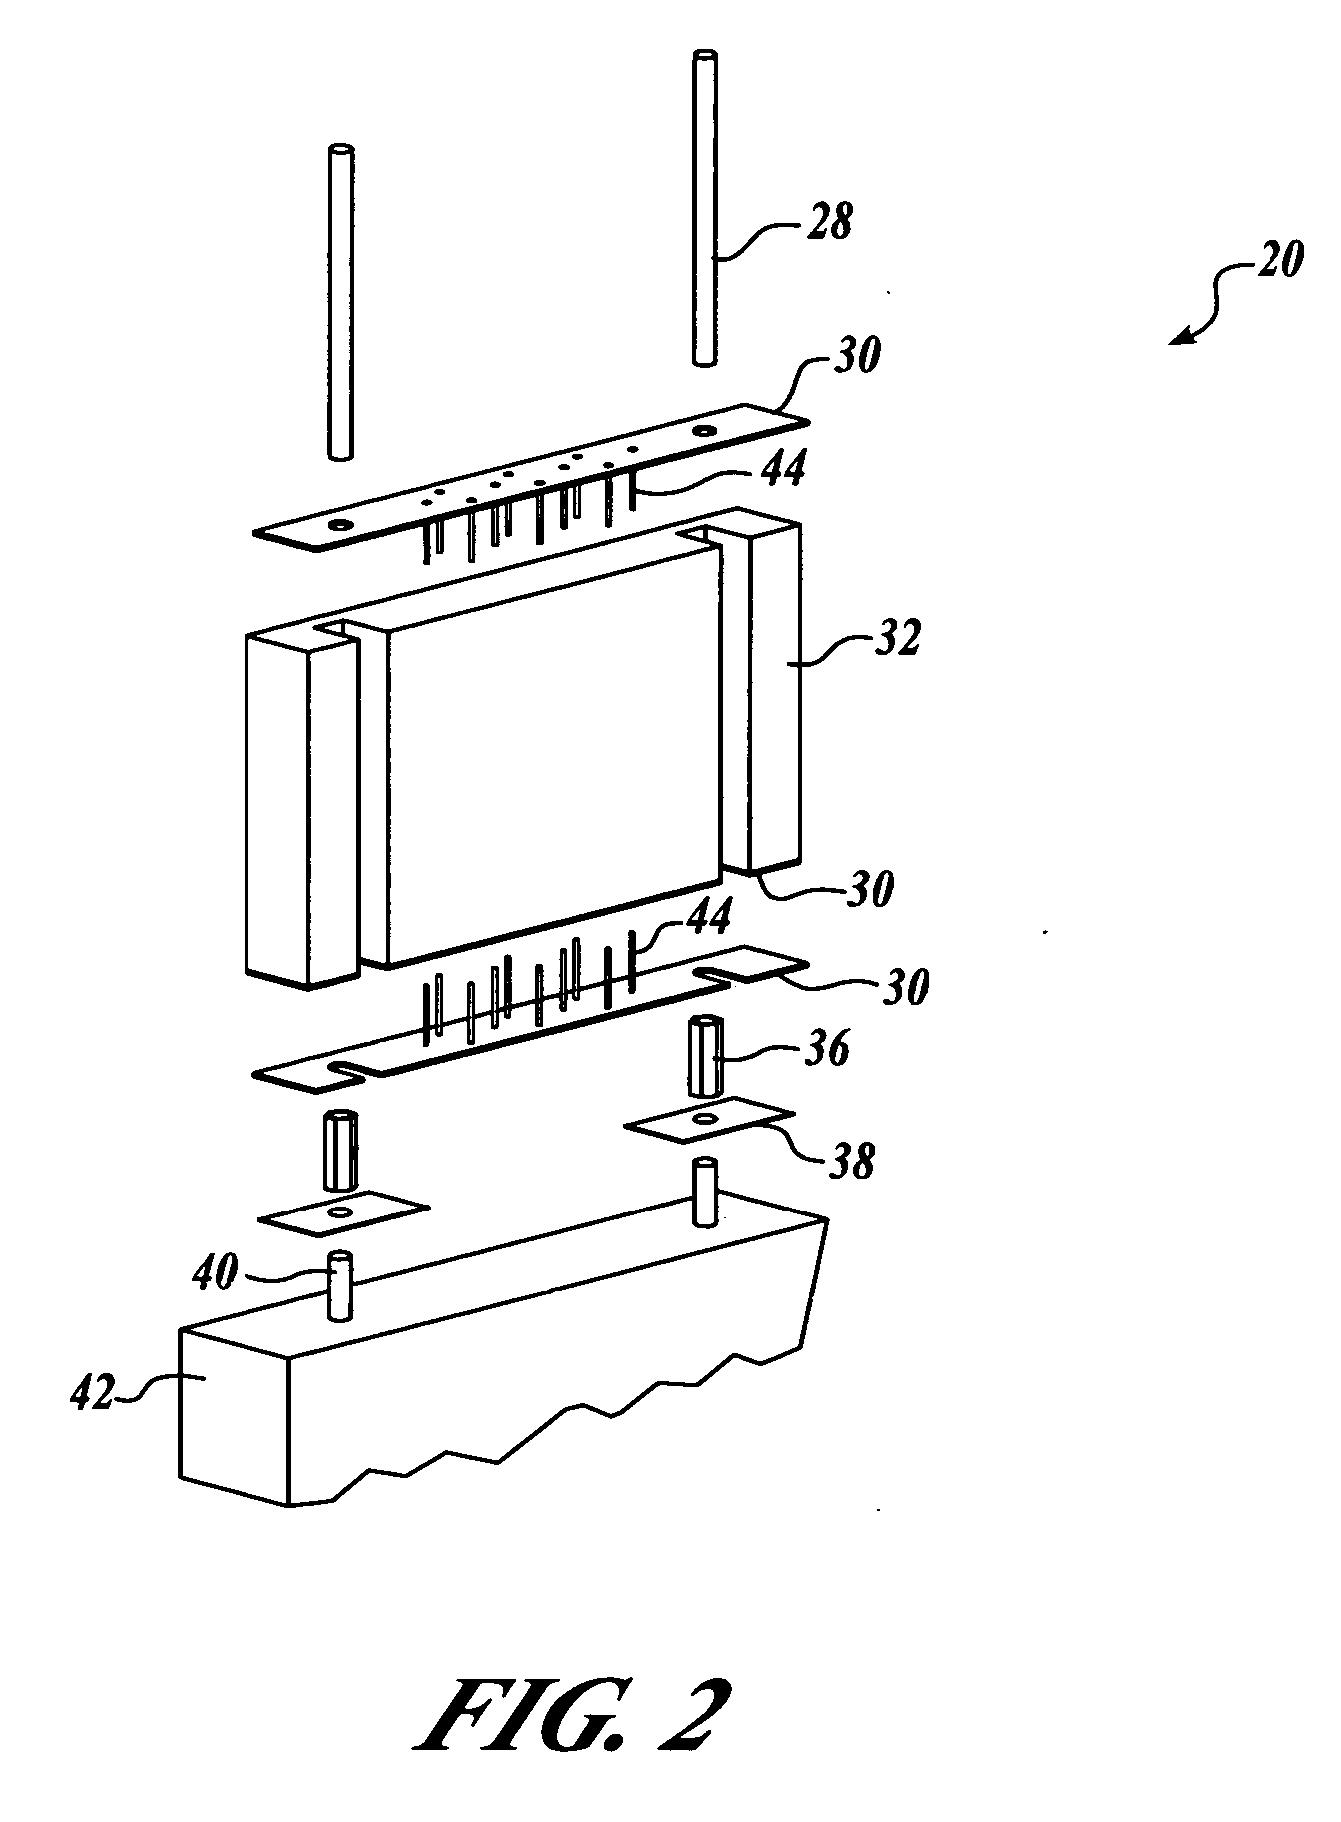 Shear wall attachment assembly and method of use